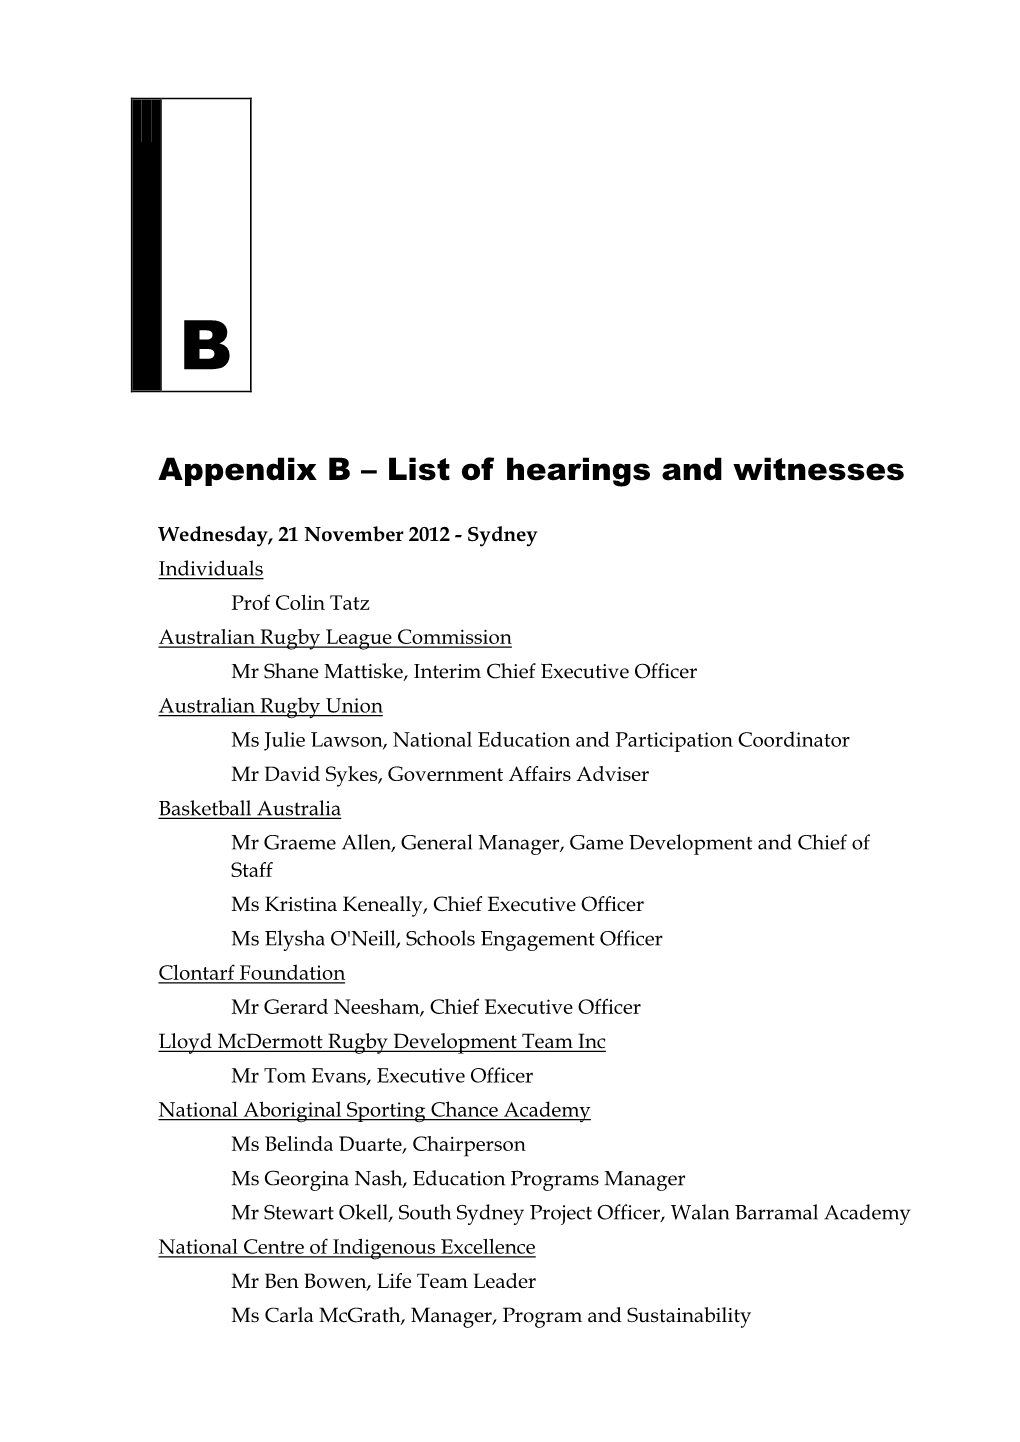 Appendix B – List of Hearings and Witnesses